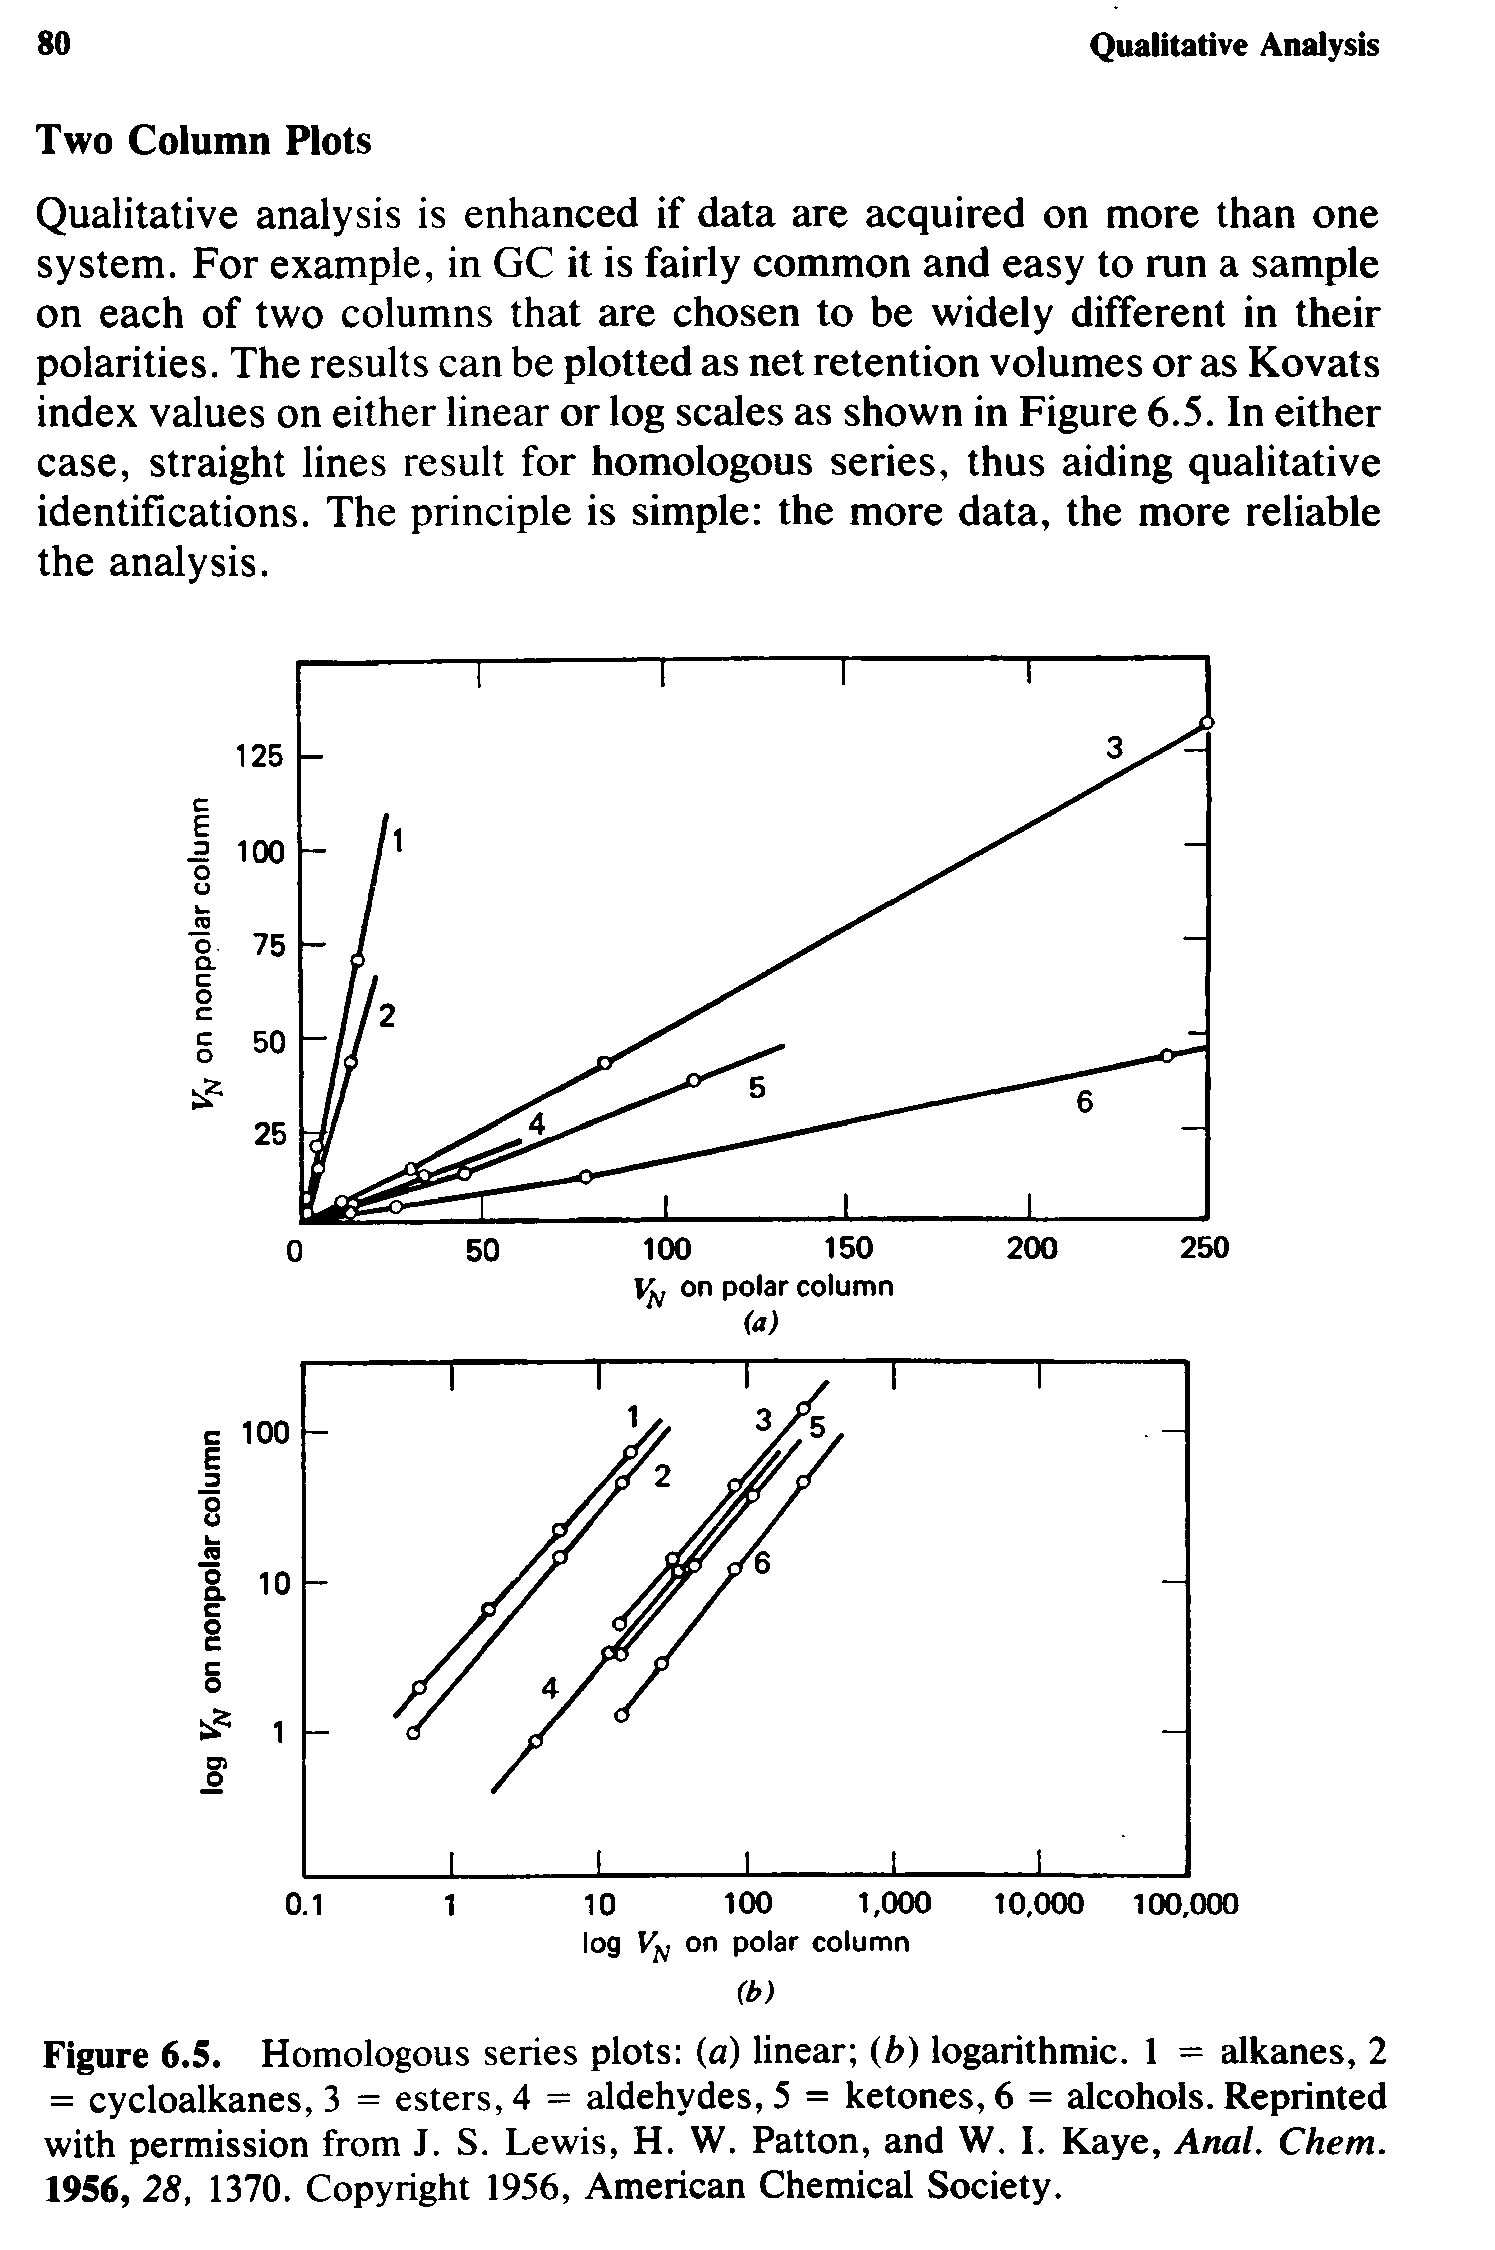 Figure 6.5. Homologous series plots (a) linear (b) logarithmic. 1 = alkanes, 2 = cycloalkanes, 3 = esters, 4 = aldehydes, 5 = ketones, 6 = alcohols. Reprinted with permission from J. S. Lewis, H. W. Patton, and W. I. Kaye, Anal. Chem. 1956, 28, 1370. Copyright 1956, American Chemical Society.